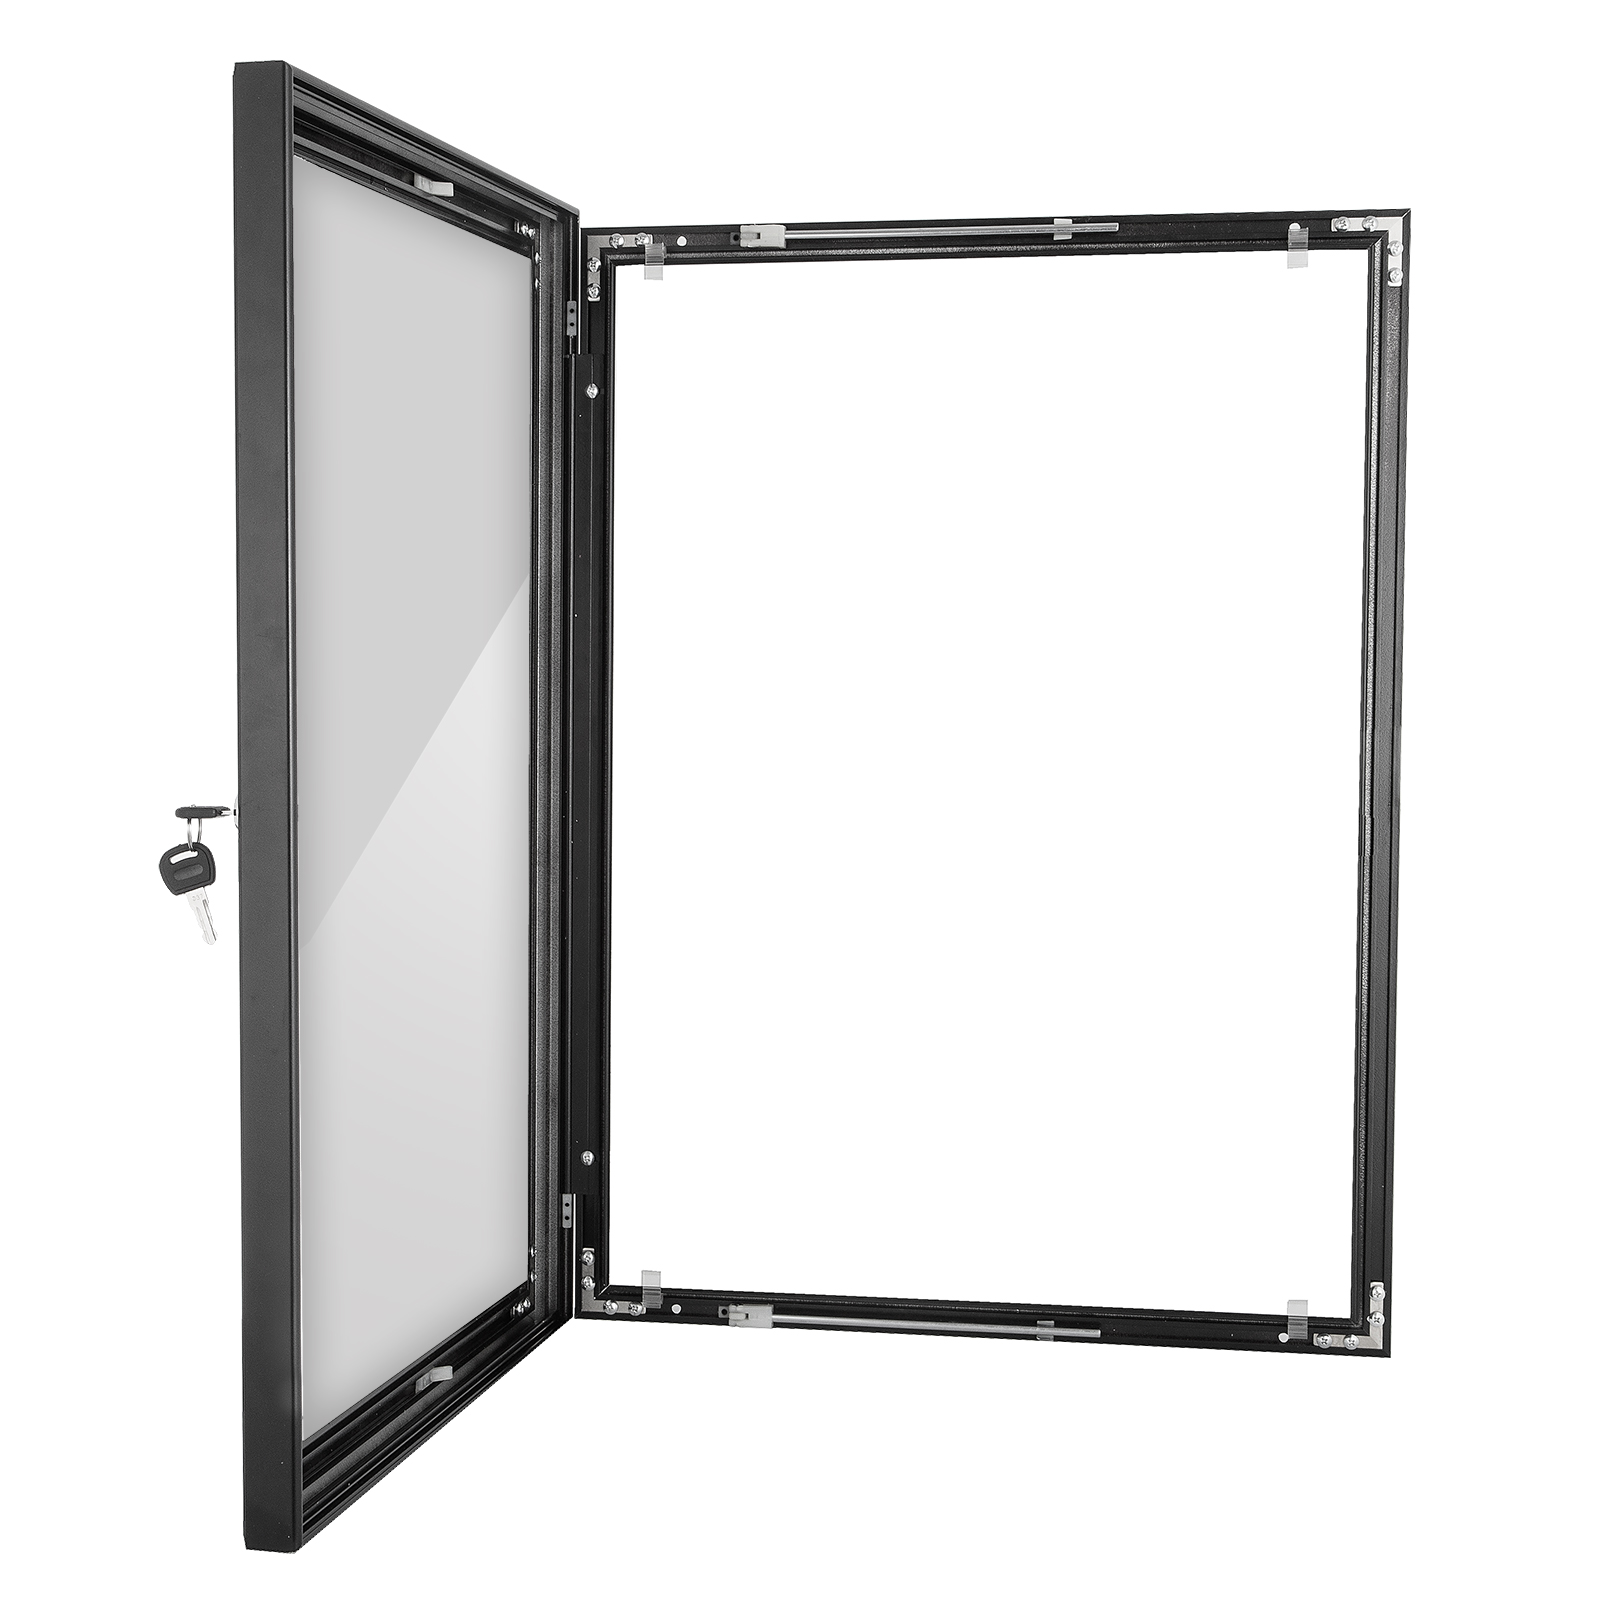 BTdahong A2 Lockable Outdoor Poster Display Case Box Waterproof Showboard for Menus Pubs Signs Advertising Exhibition